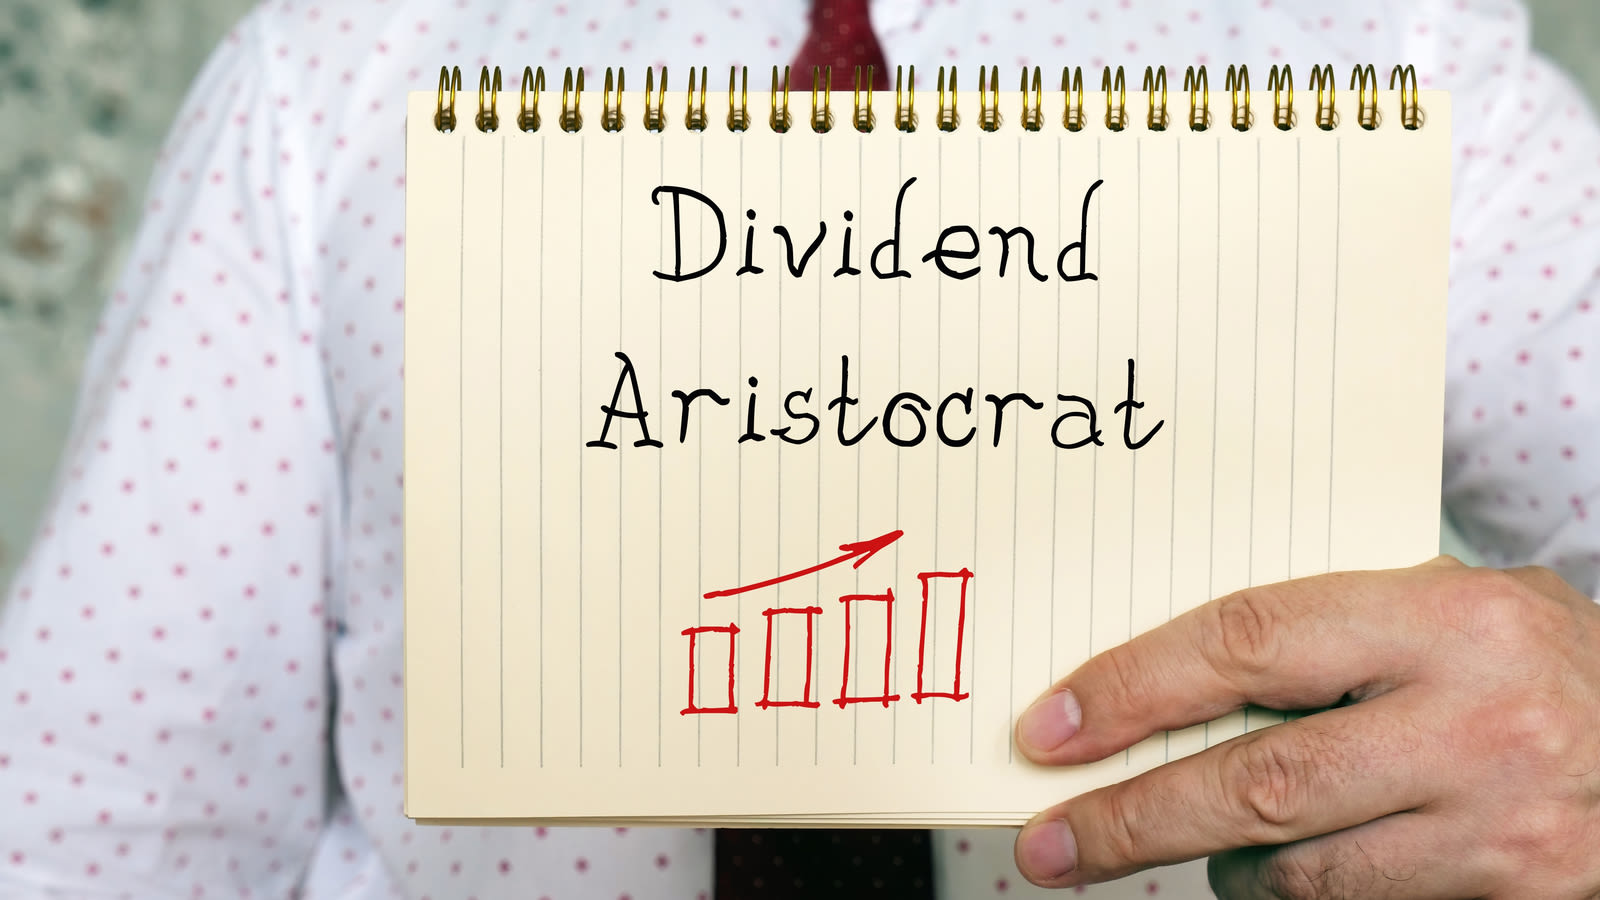 3 Dividend Aristocrats Now Cheaper Than During the 2008 Financial Crisis